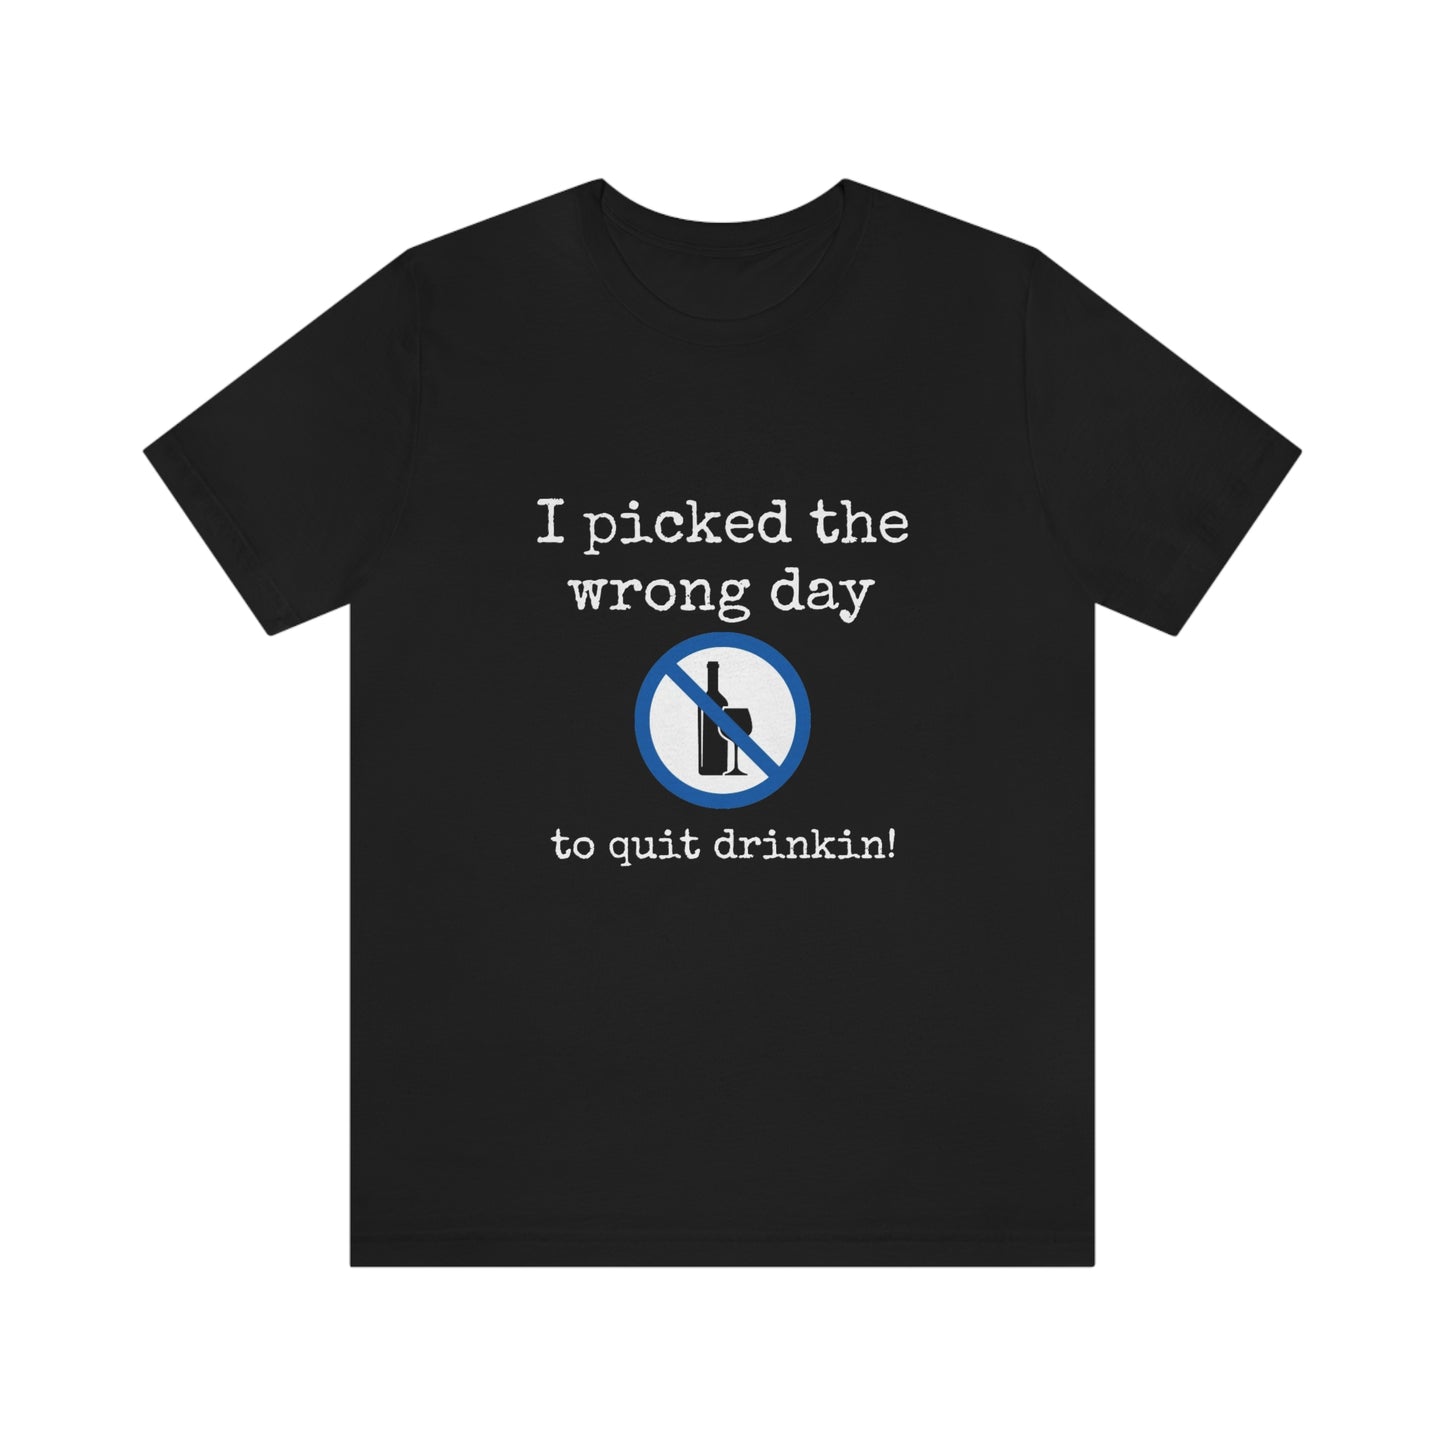 I picked the wrong day to quit drinking - Funny Unisex Short Sleeve Tee - CrazyTomTShirts